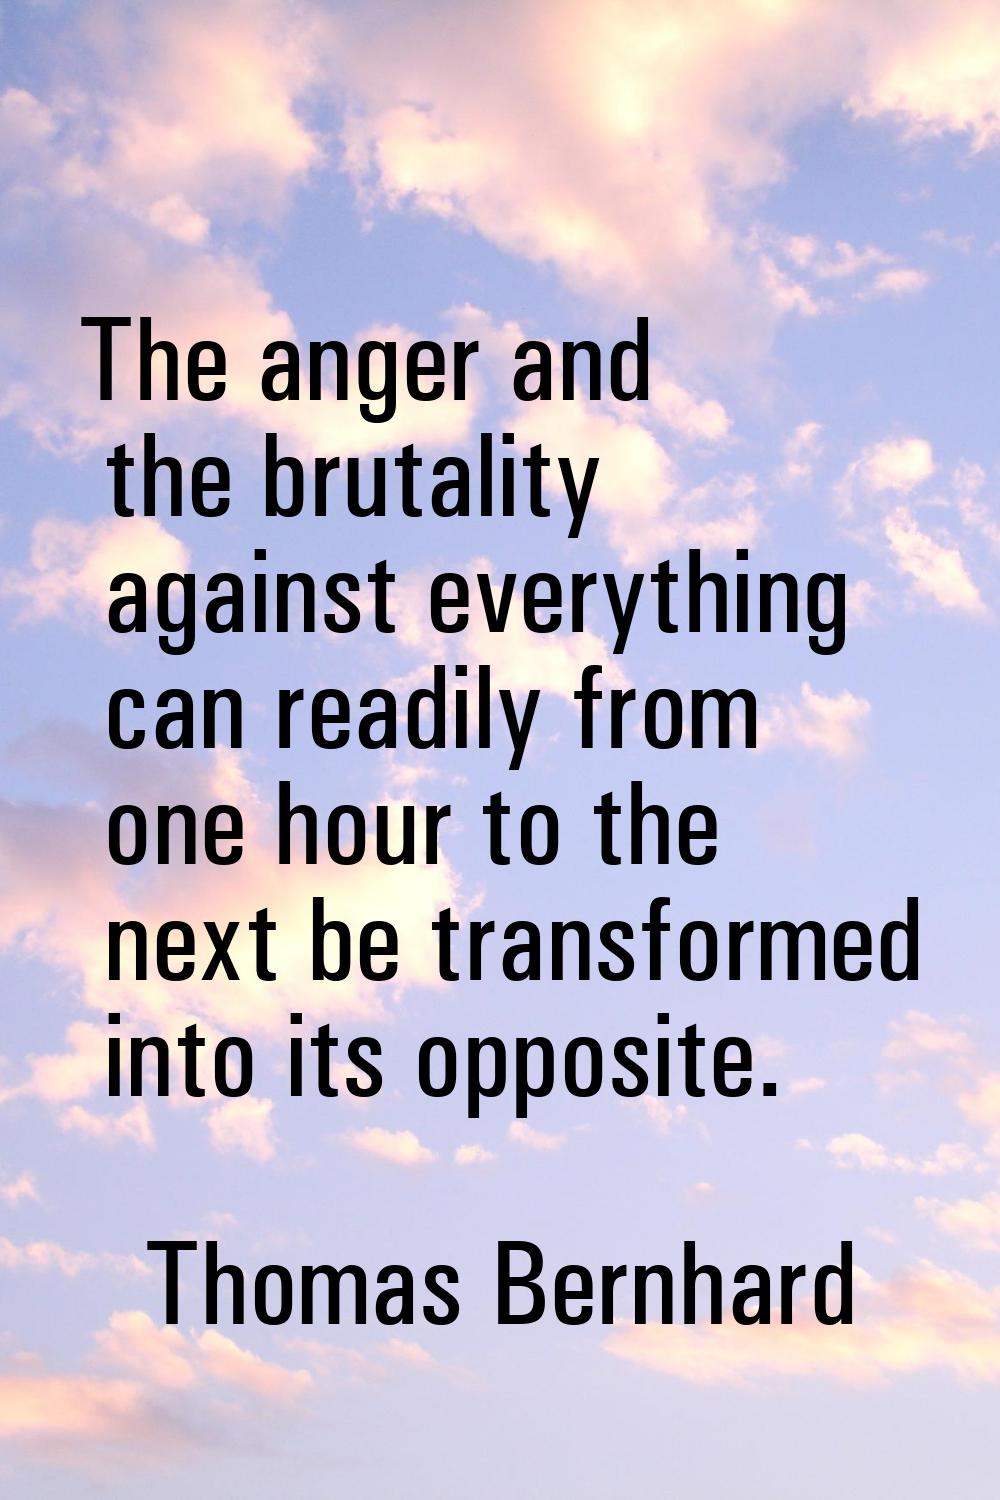 The anger and the brutality against everything can readily from one hour to the next be transformed